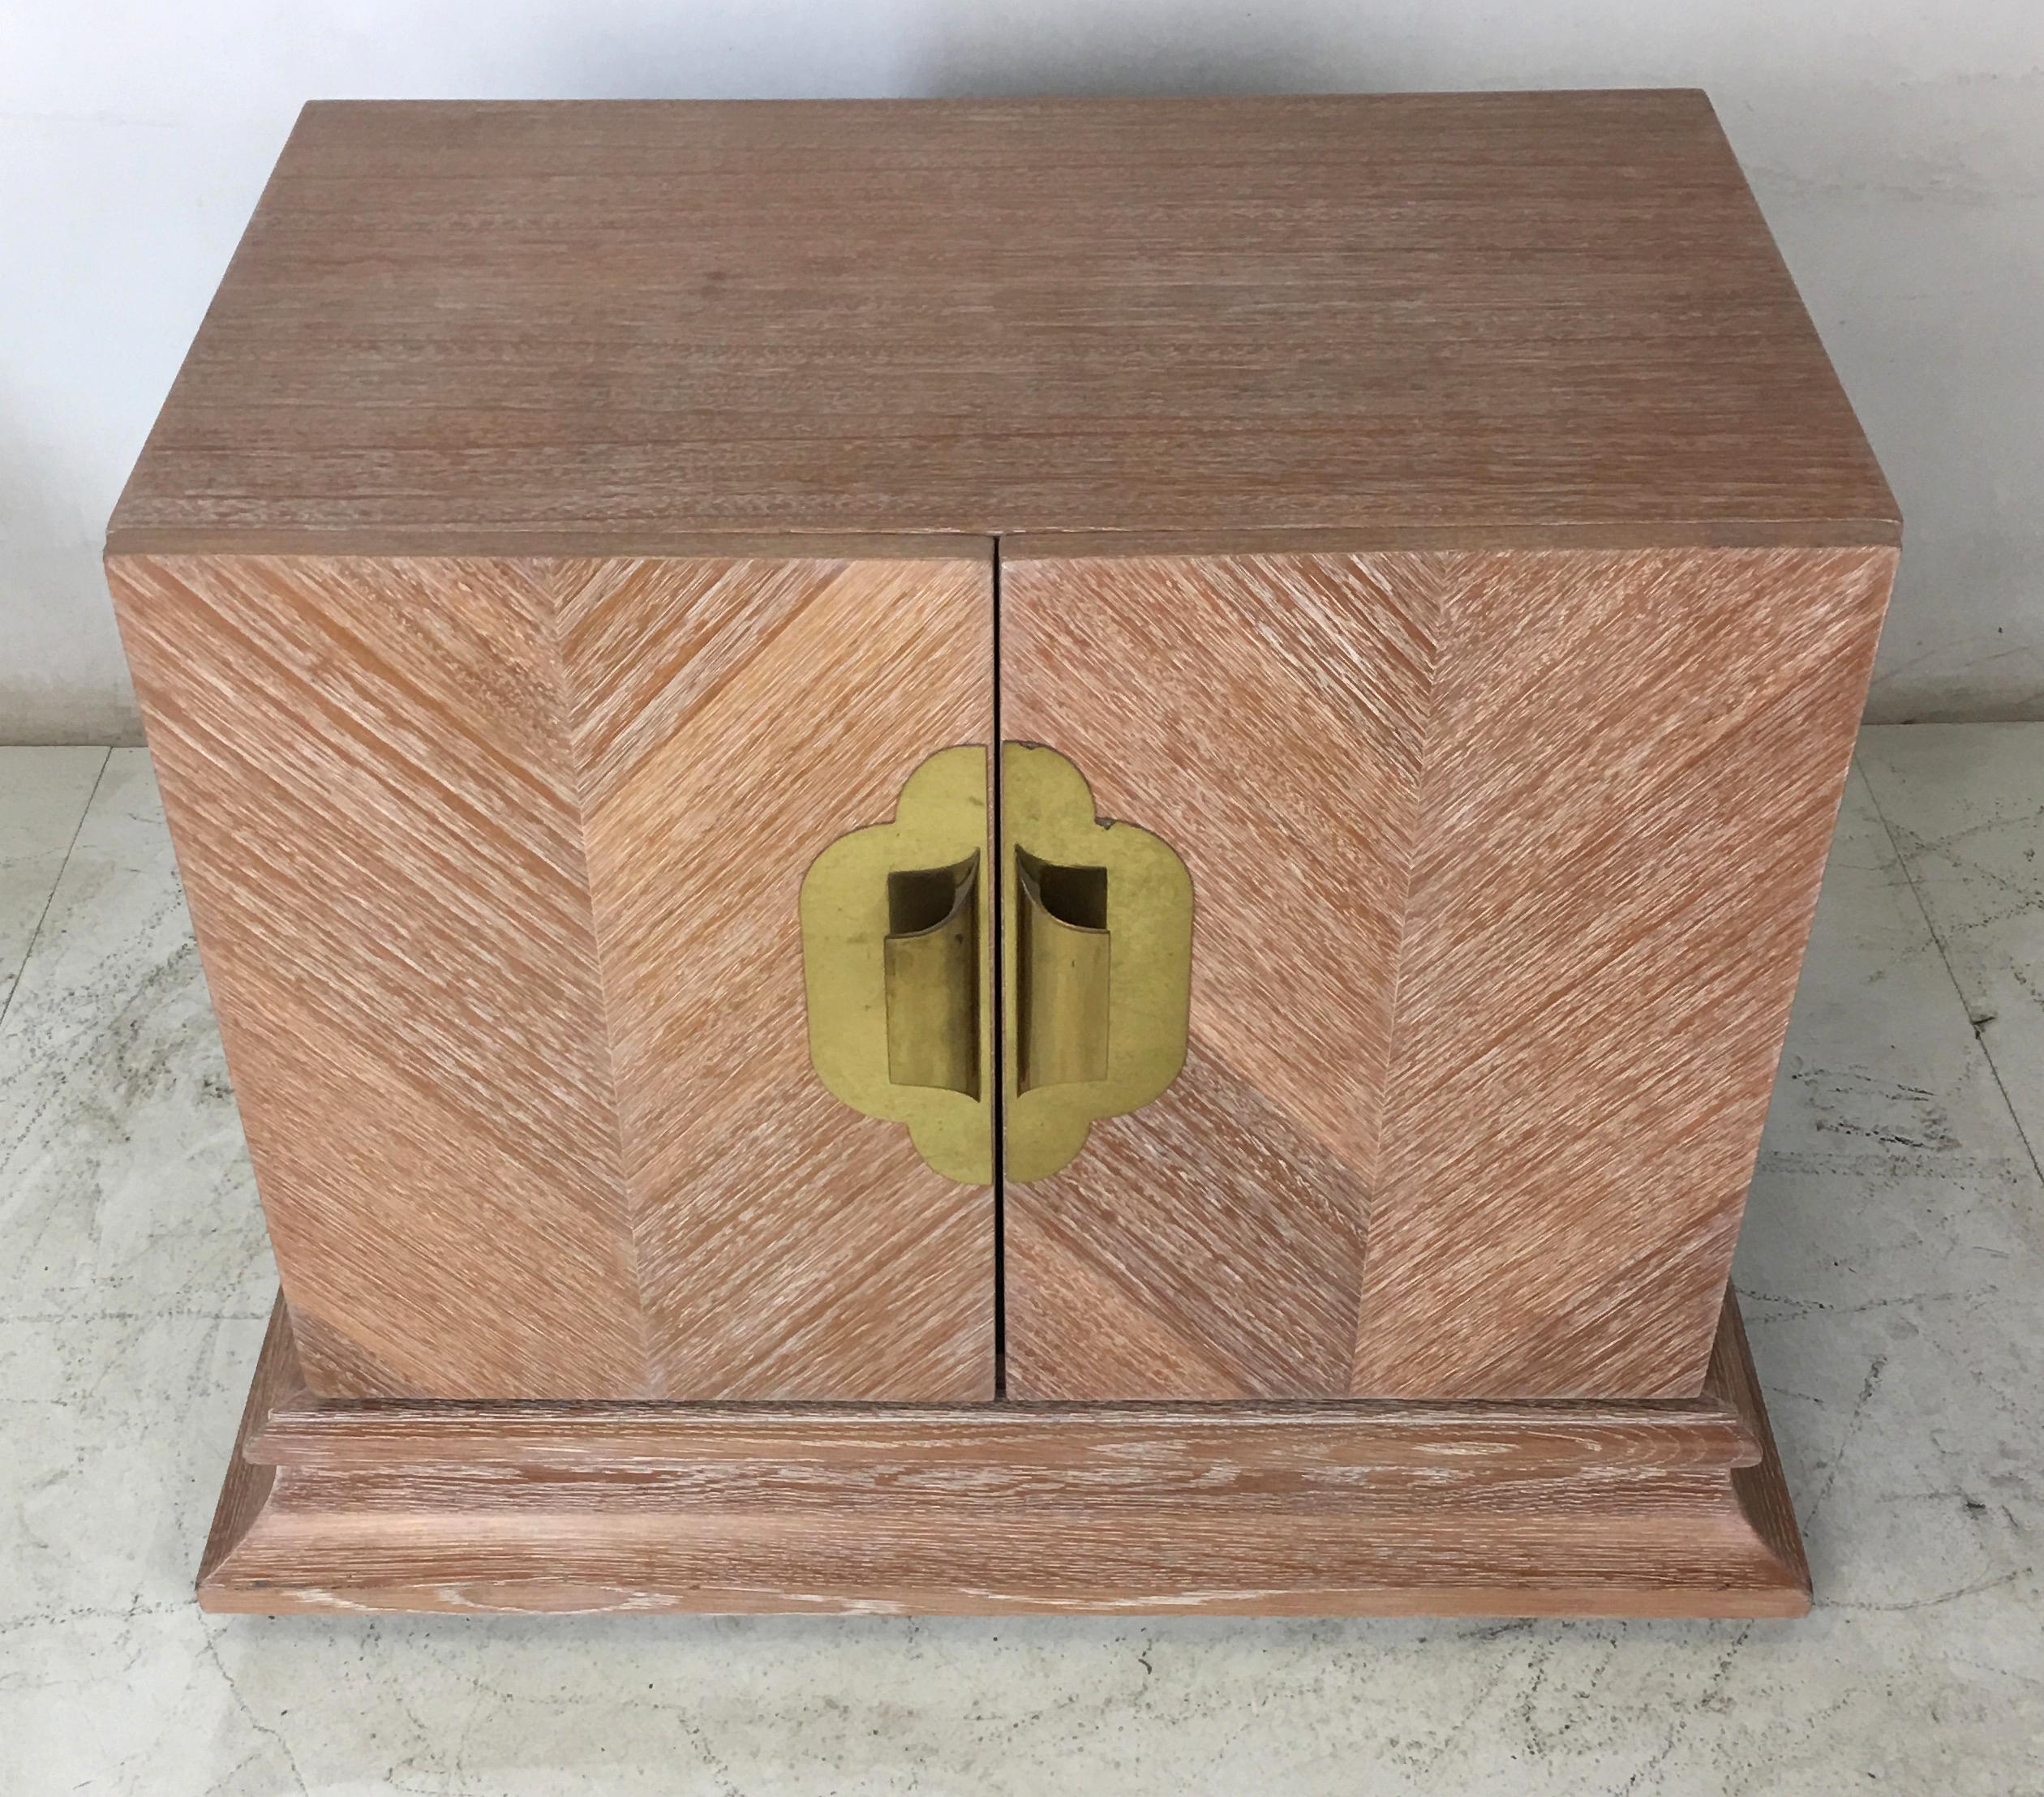 Handsome cerused oak nightstand or end table with chevron patterned Marquetry and polished brass hardware. The interior features a single shelf. Top quality materials and workmanship.